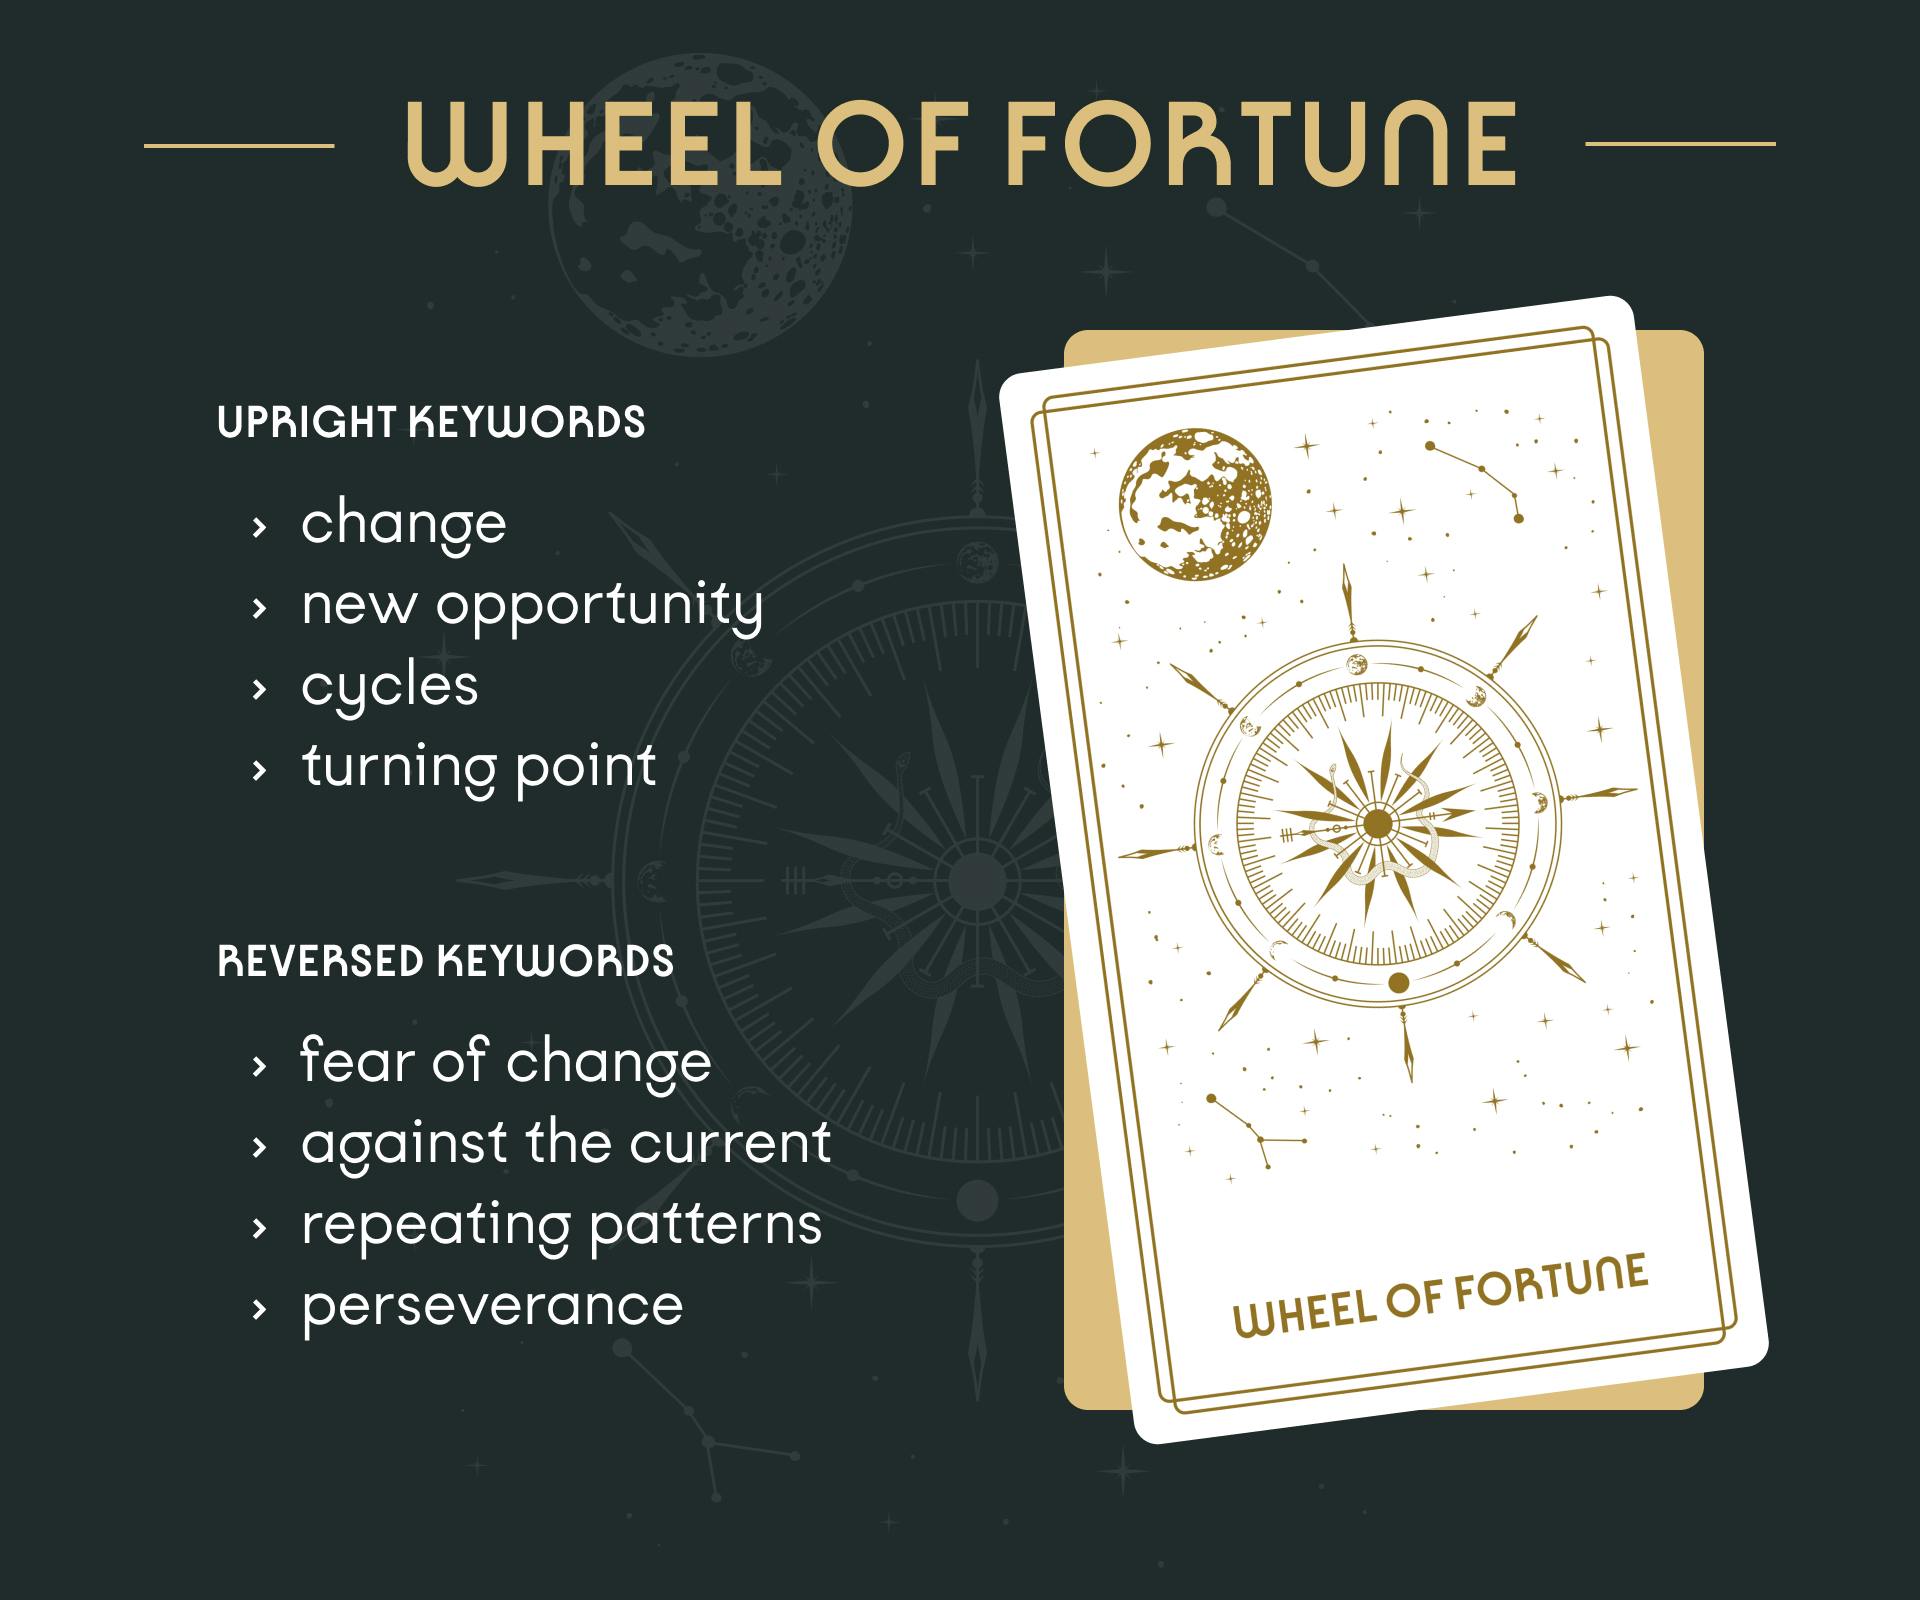 Wheel of Fortune Tarot Card Upright and Reversed Keywords